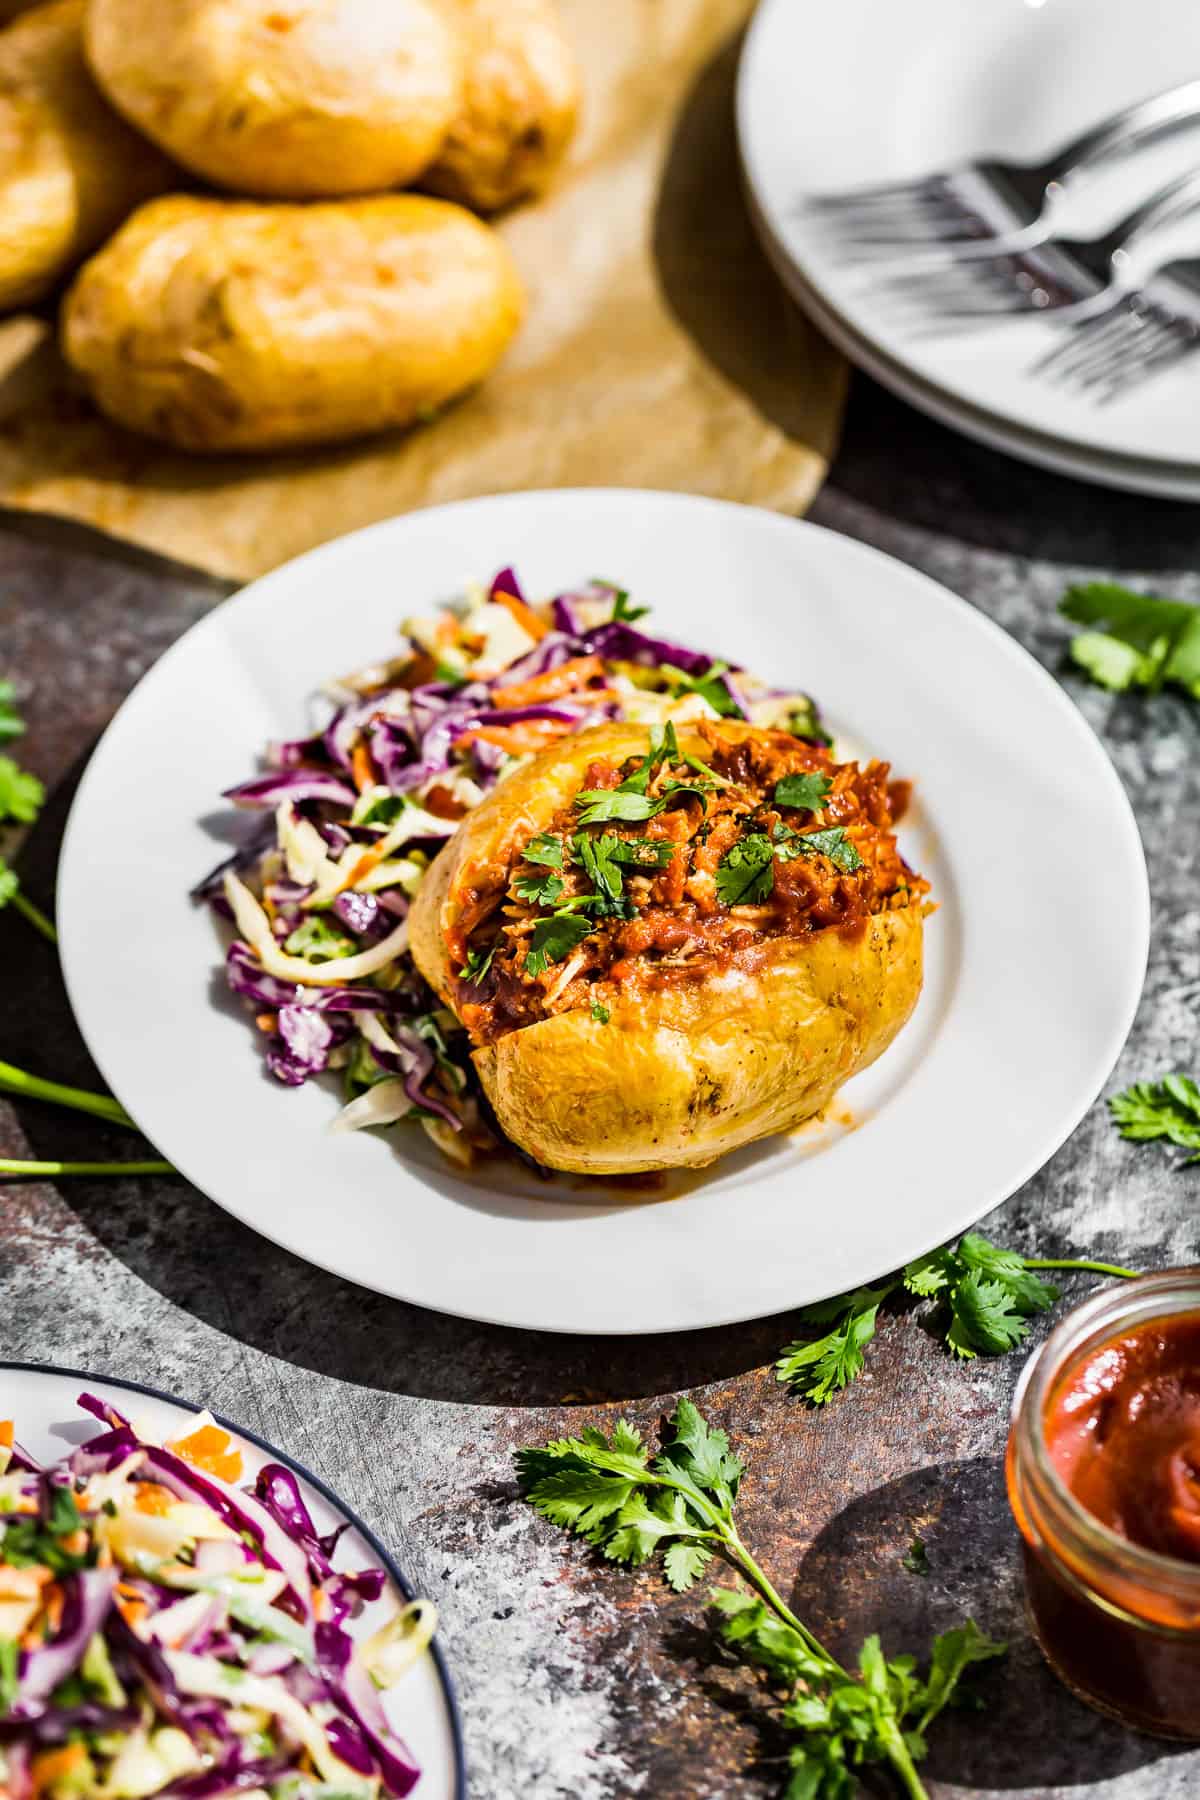 Side view of Instant Pot BBQ Chicken stuffed into a baked potato with slaw on the side.